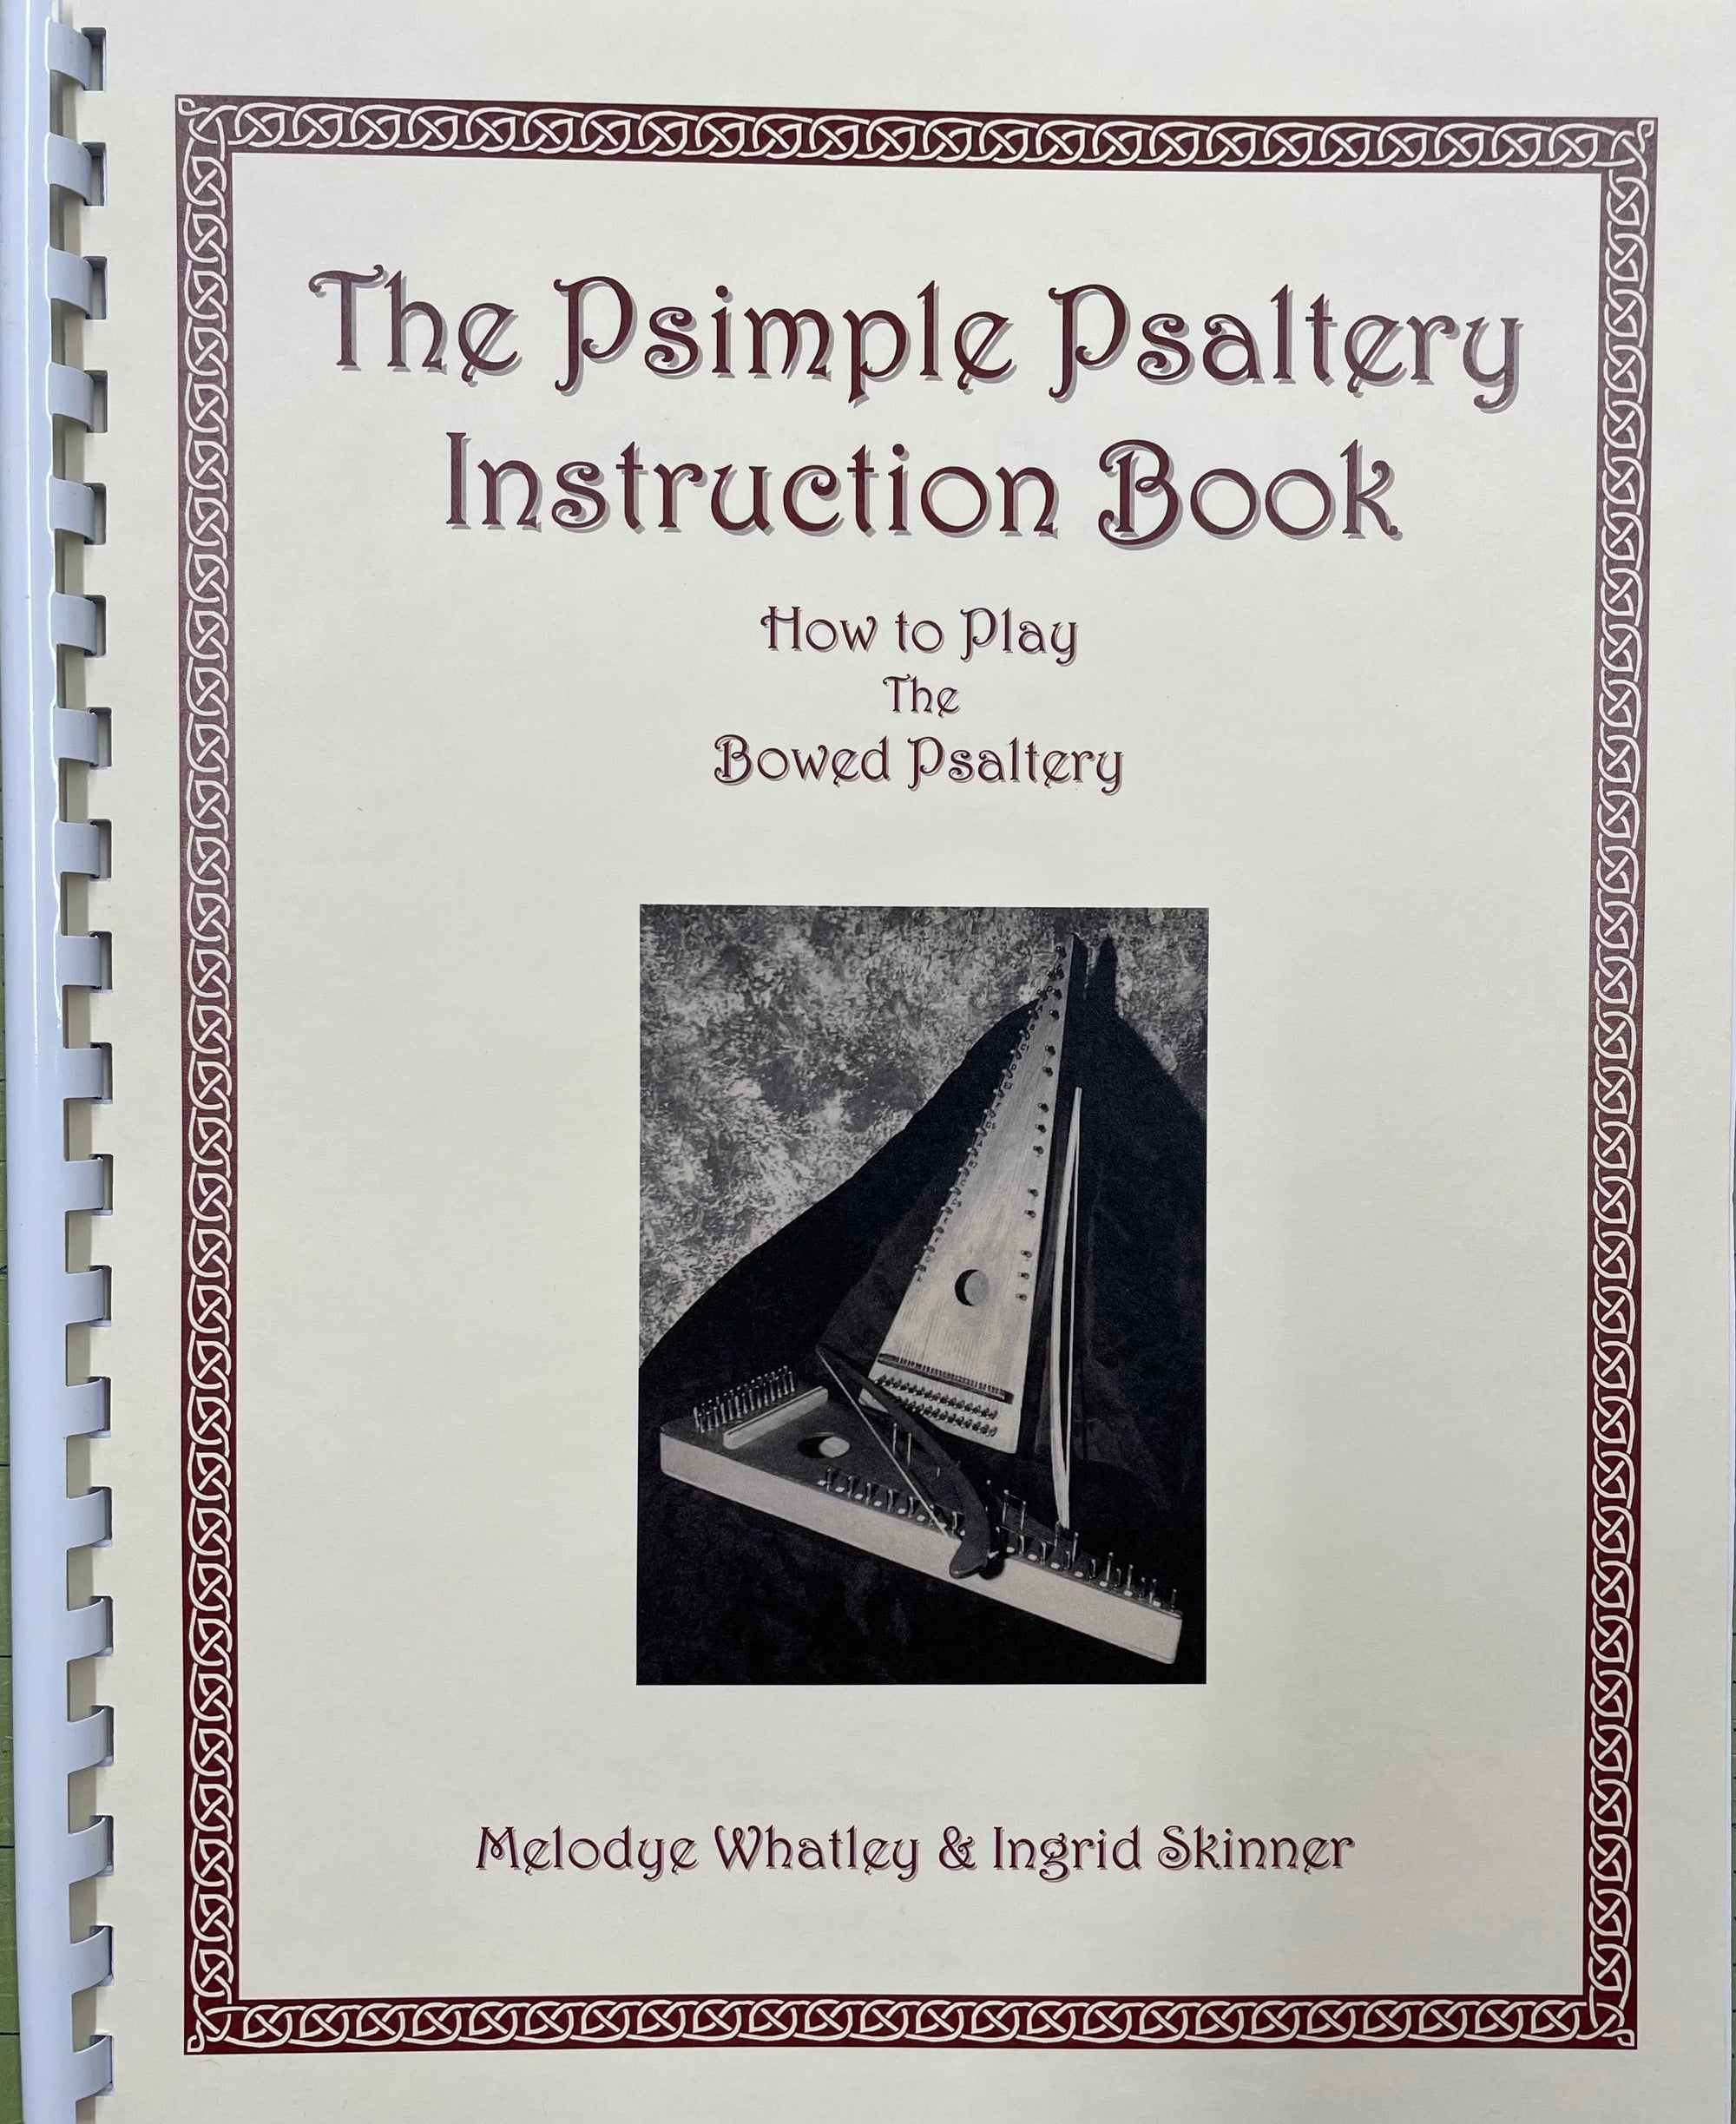 An instruction book titled "The Psimple Psaltery" by Melodye Whatley & Ingrid Skinner, featuring the image of a bowed psaltery on the cover.